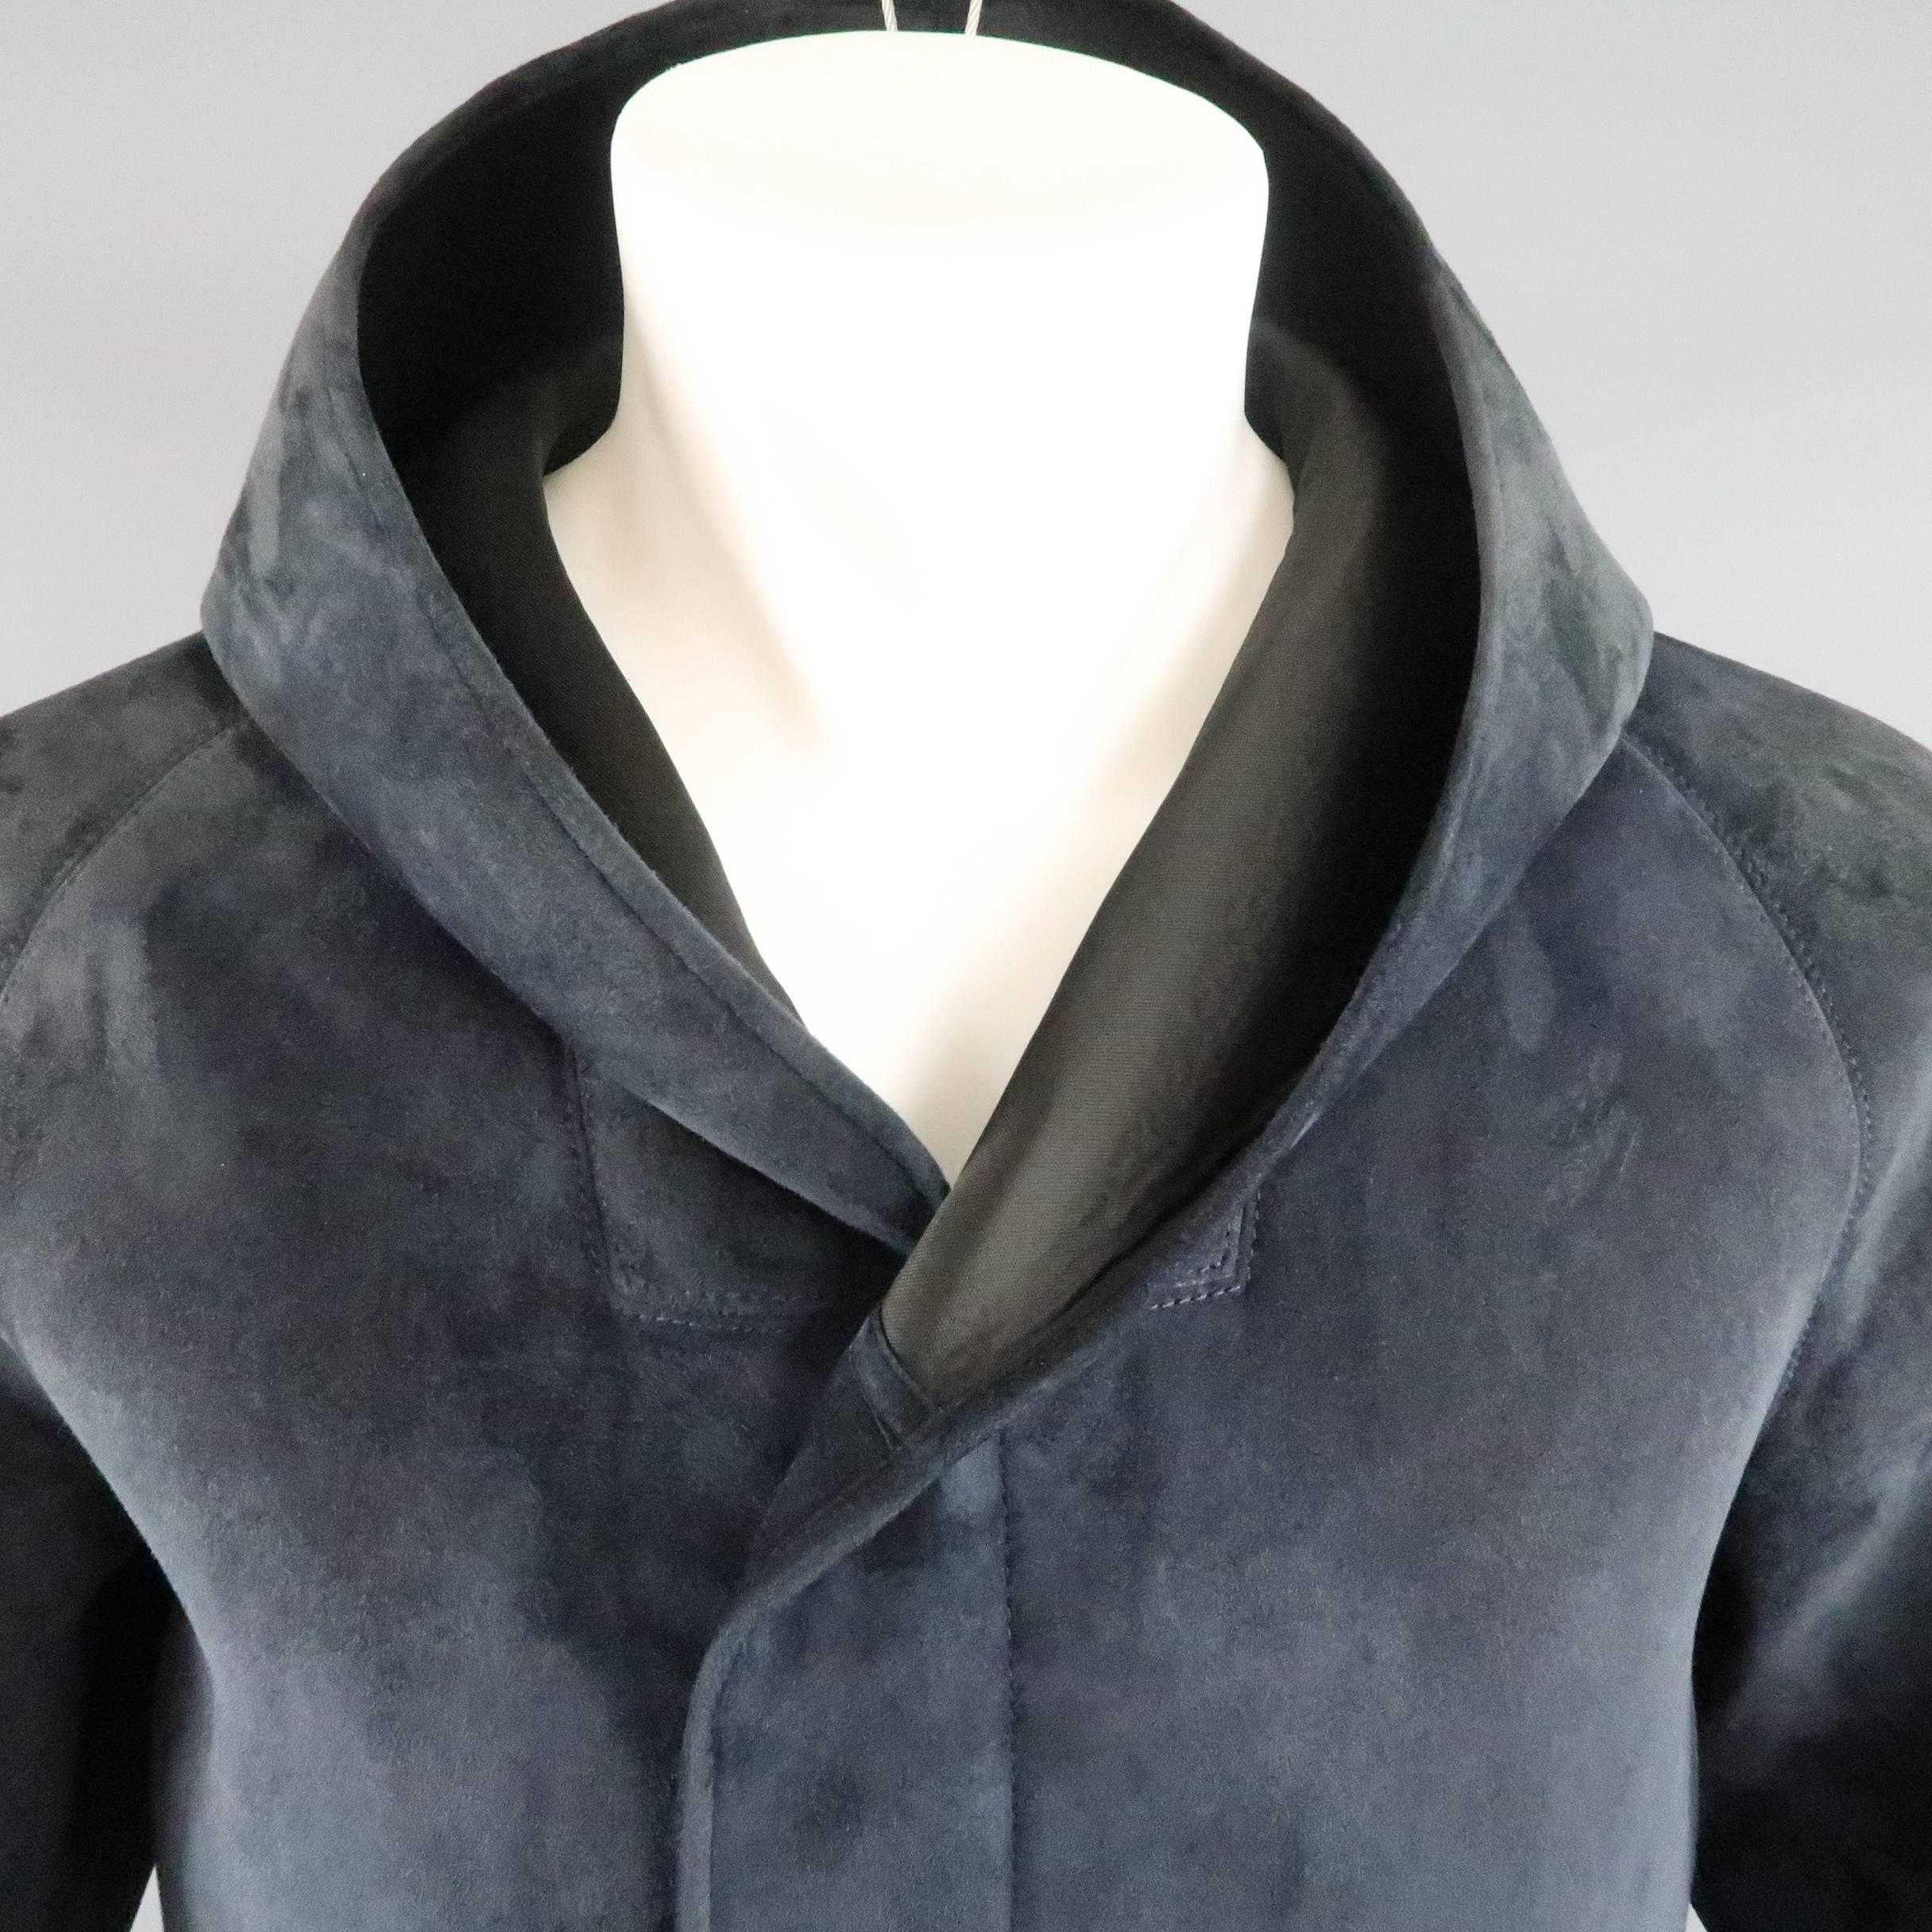 GIORGIO ARMANI jacket comes in a teal navy neoprene bonded nubuck sueded leather and features a hidden placket zip and snap front, slanted zip pockets, and oversized hood. Minor discolorations on sides. As-Is. Made in Italy.
 
Good Pre-Owned